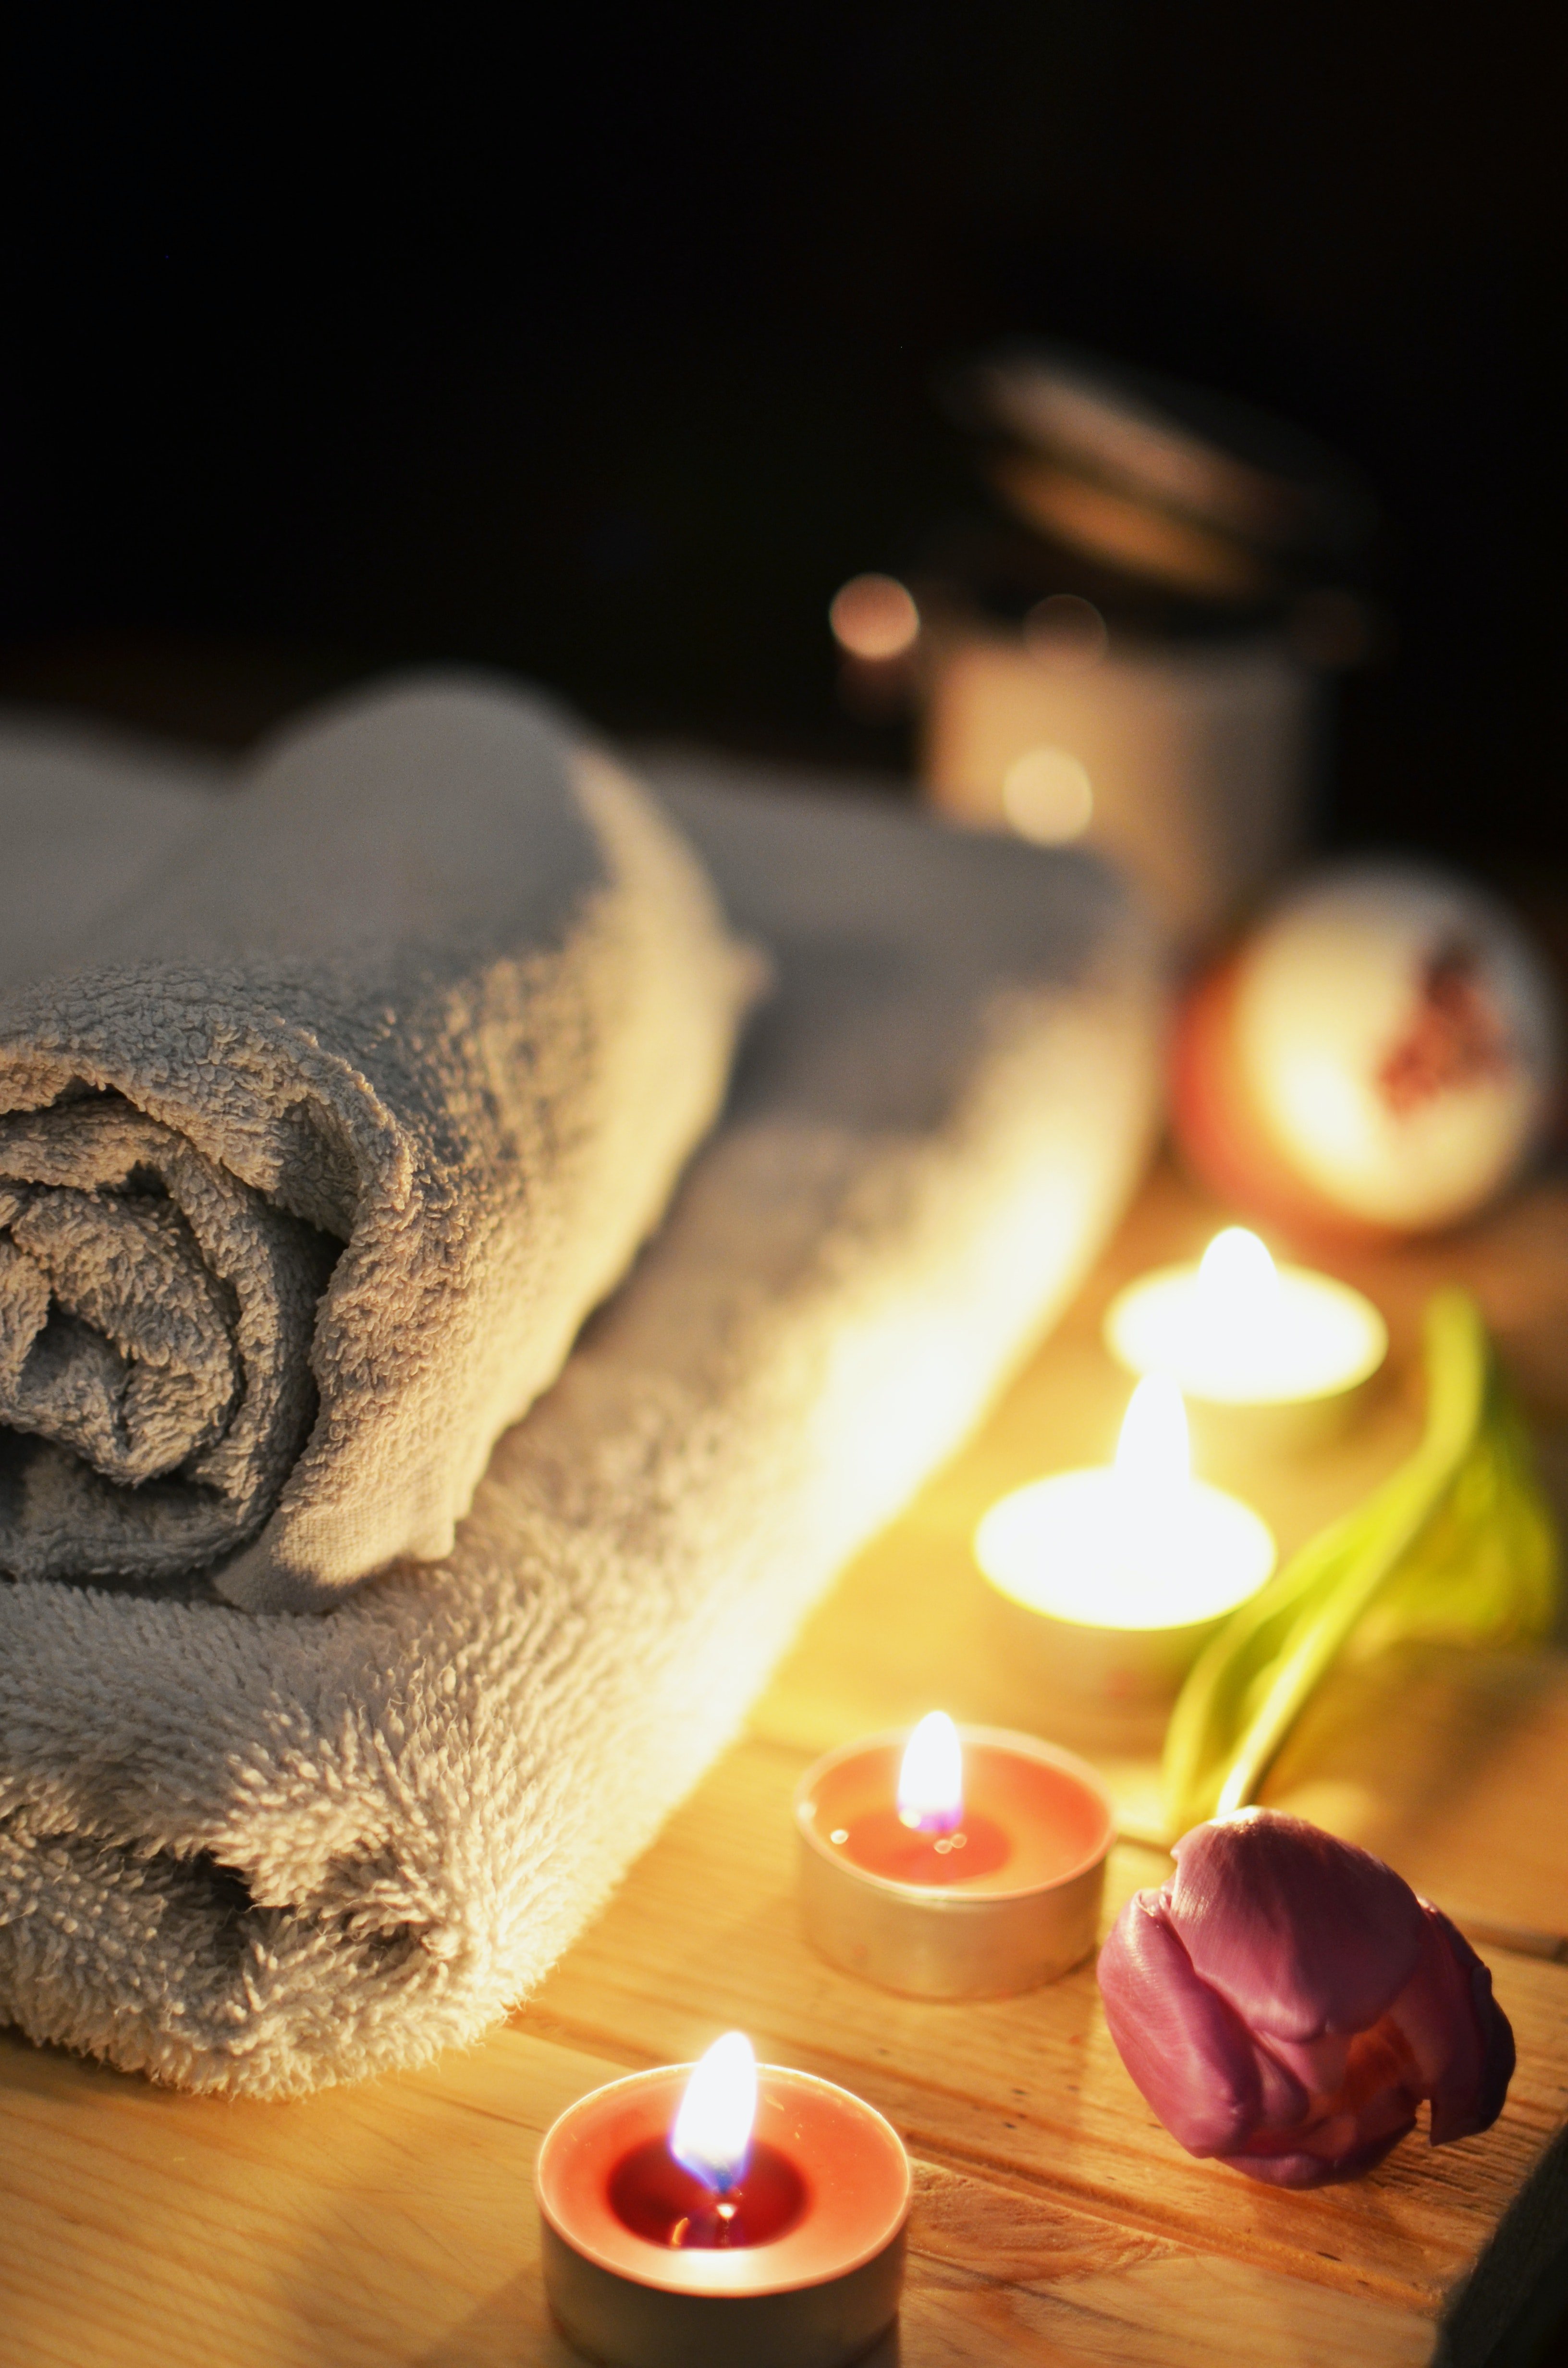 Towels and candles in a sauna | Photo: Pexels